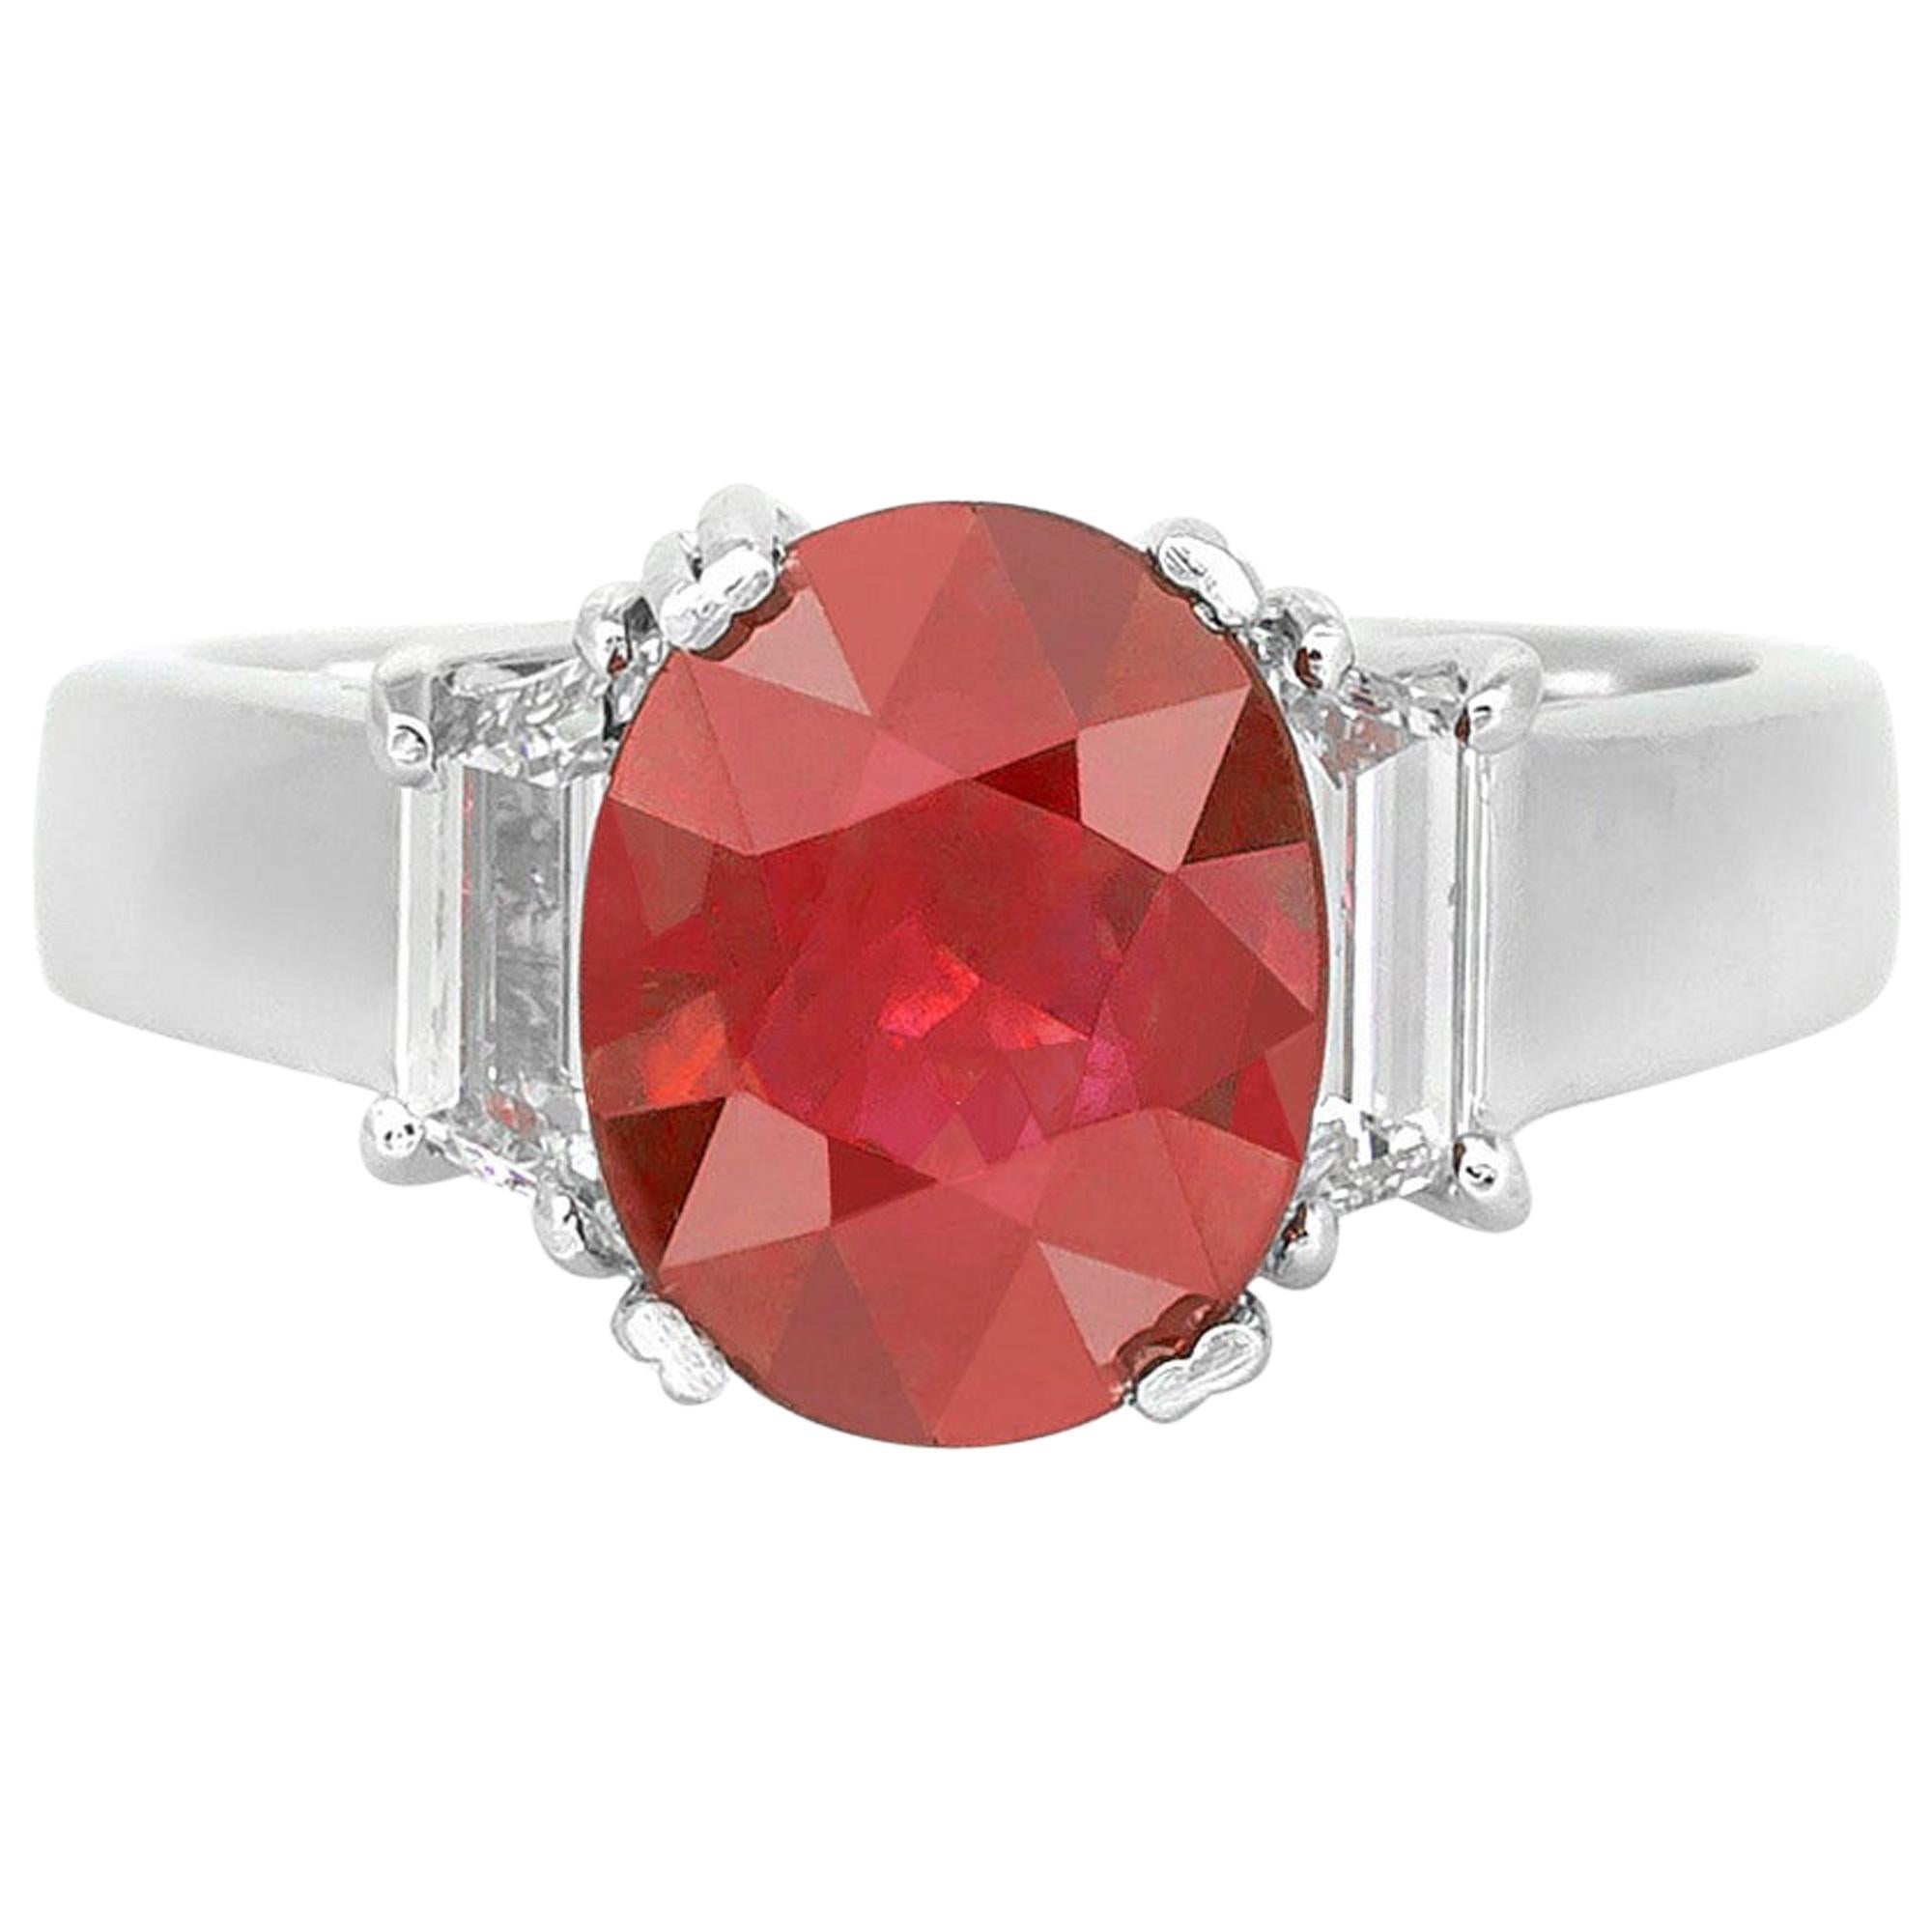 3.01 Carat Oval Cut Ruby and Diamond Ring